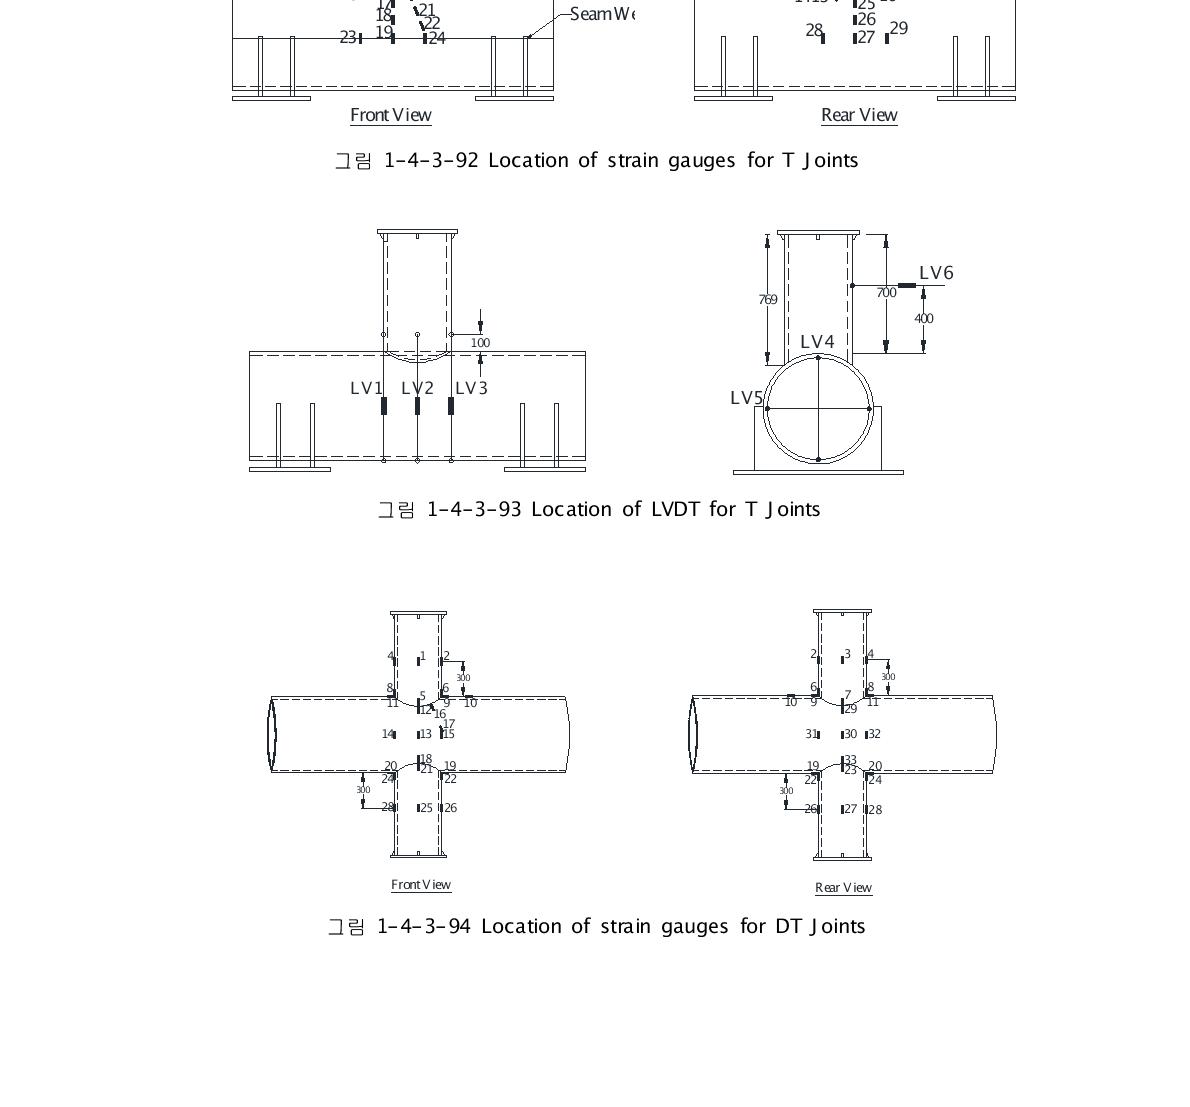 Location of LVDT for T Joints